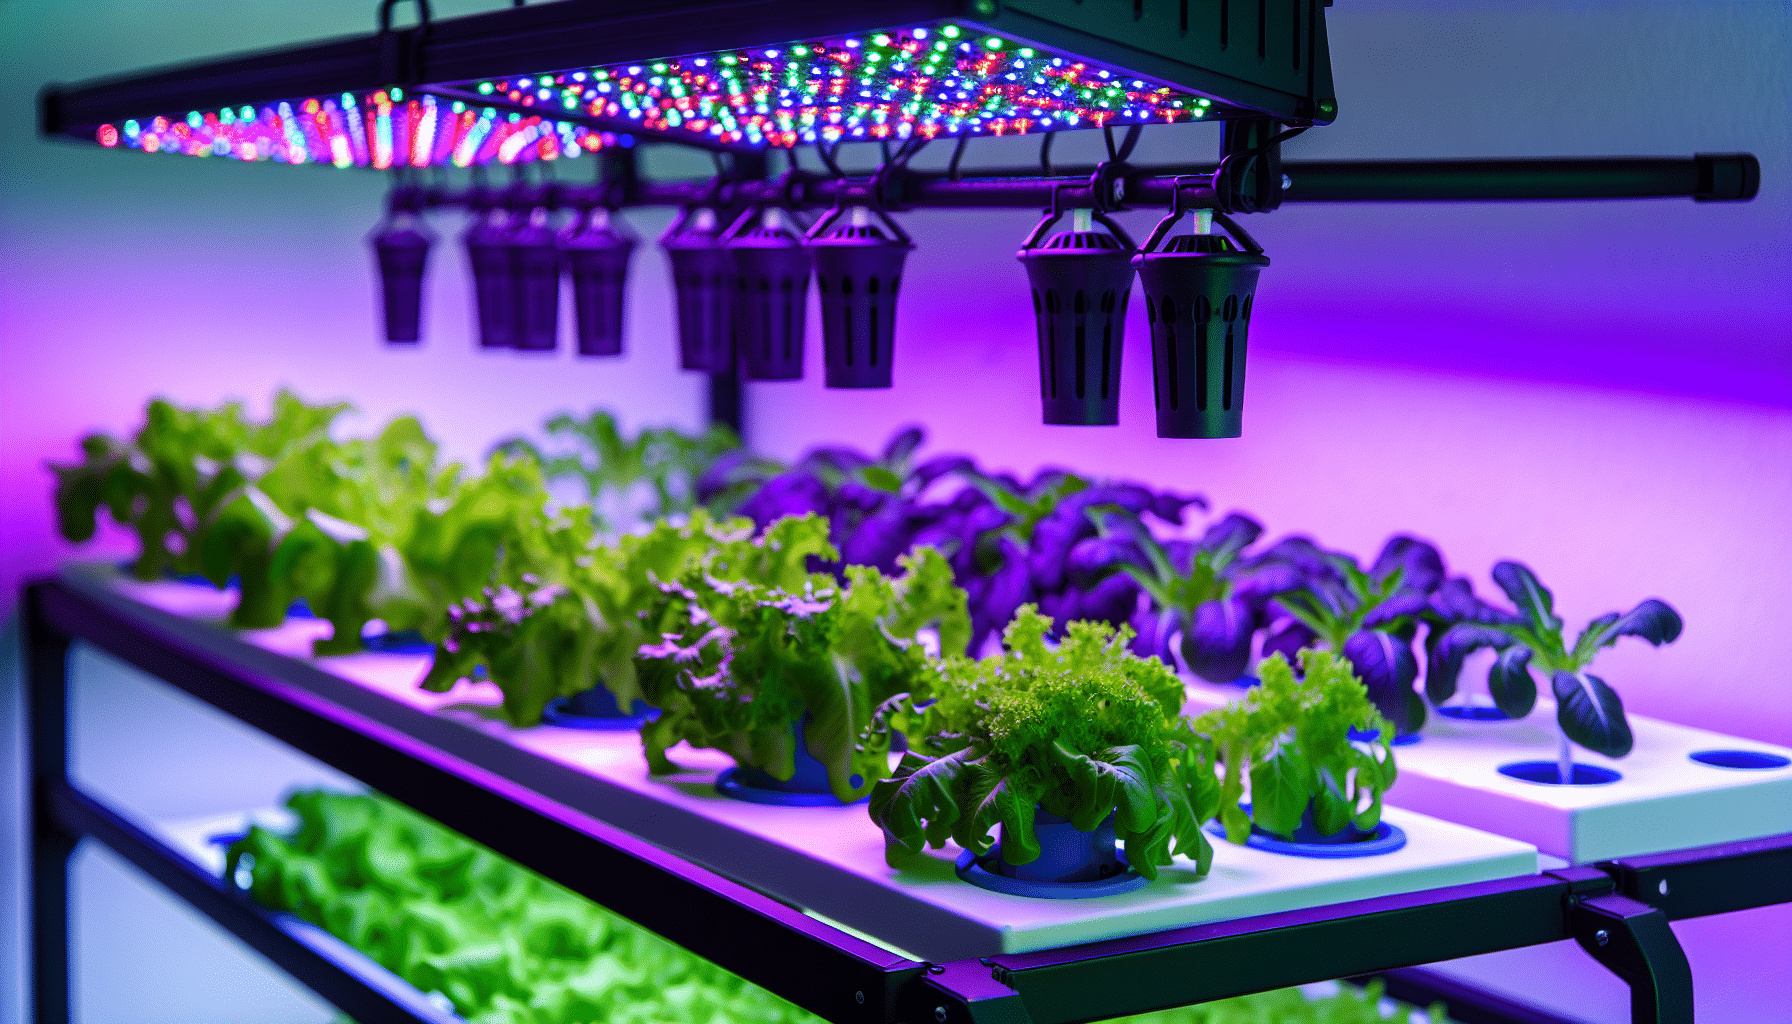 LED grow lights in Nutraponics system